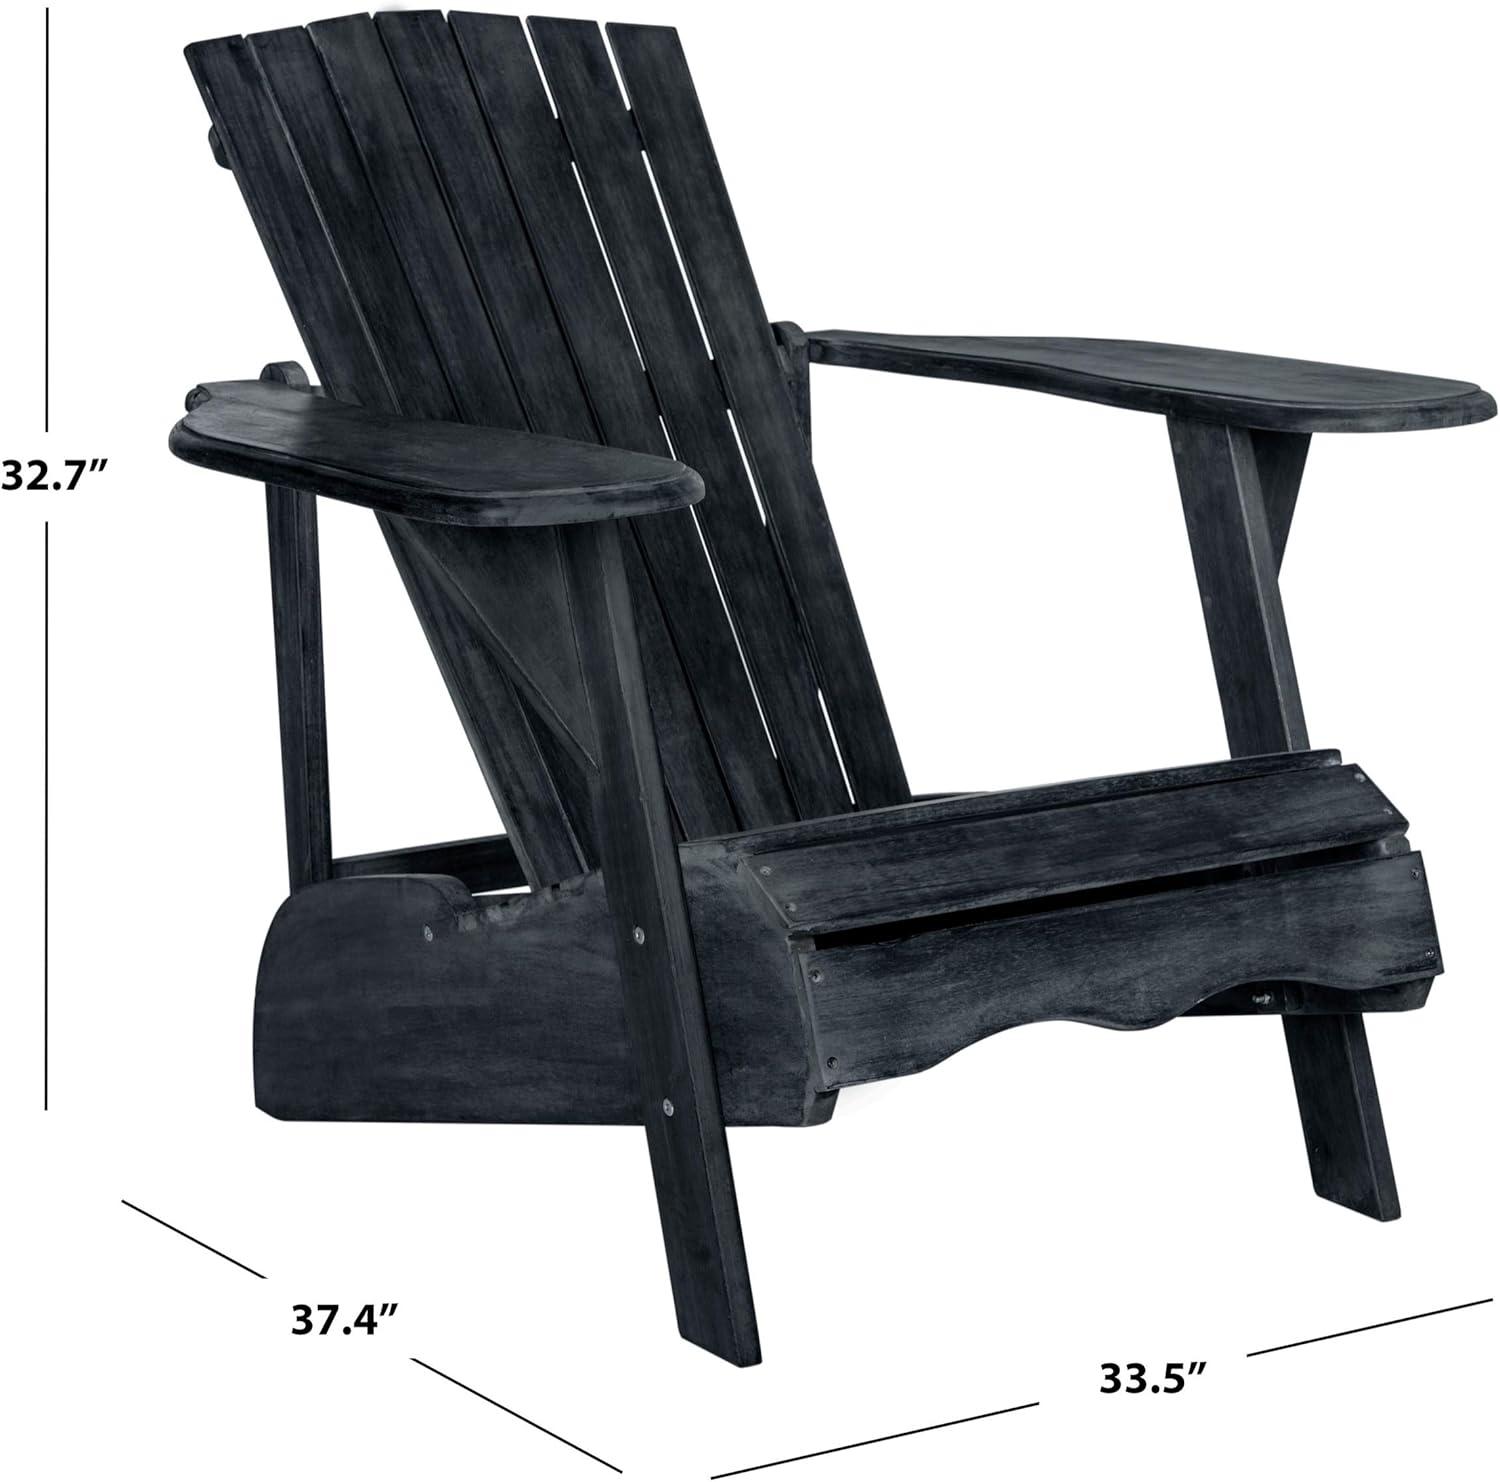 Transitional Black Acacia Wood Arm Chair with Wide Armrests